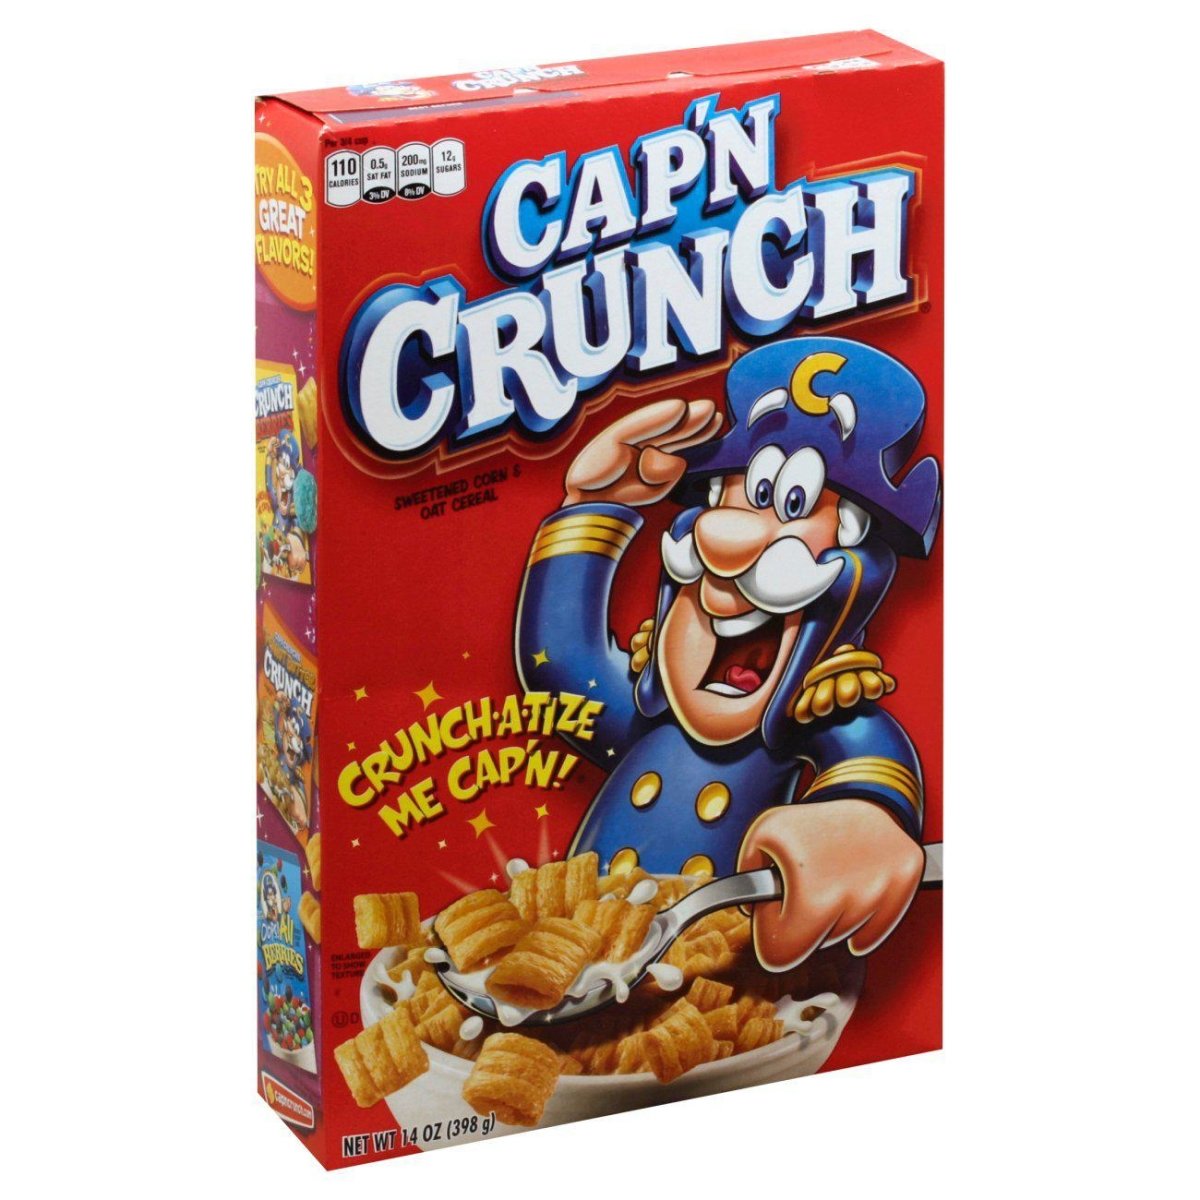 Cap'n Crunch Cereal 398g - Candy Mail UK